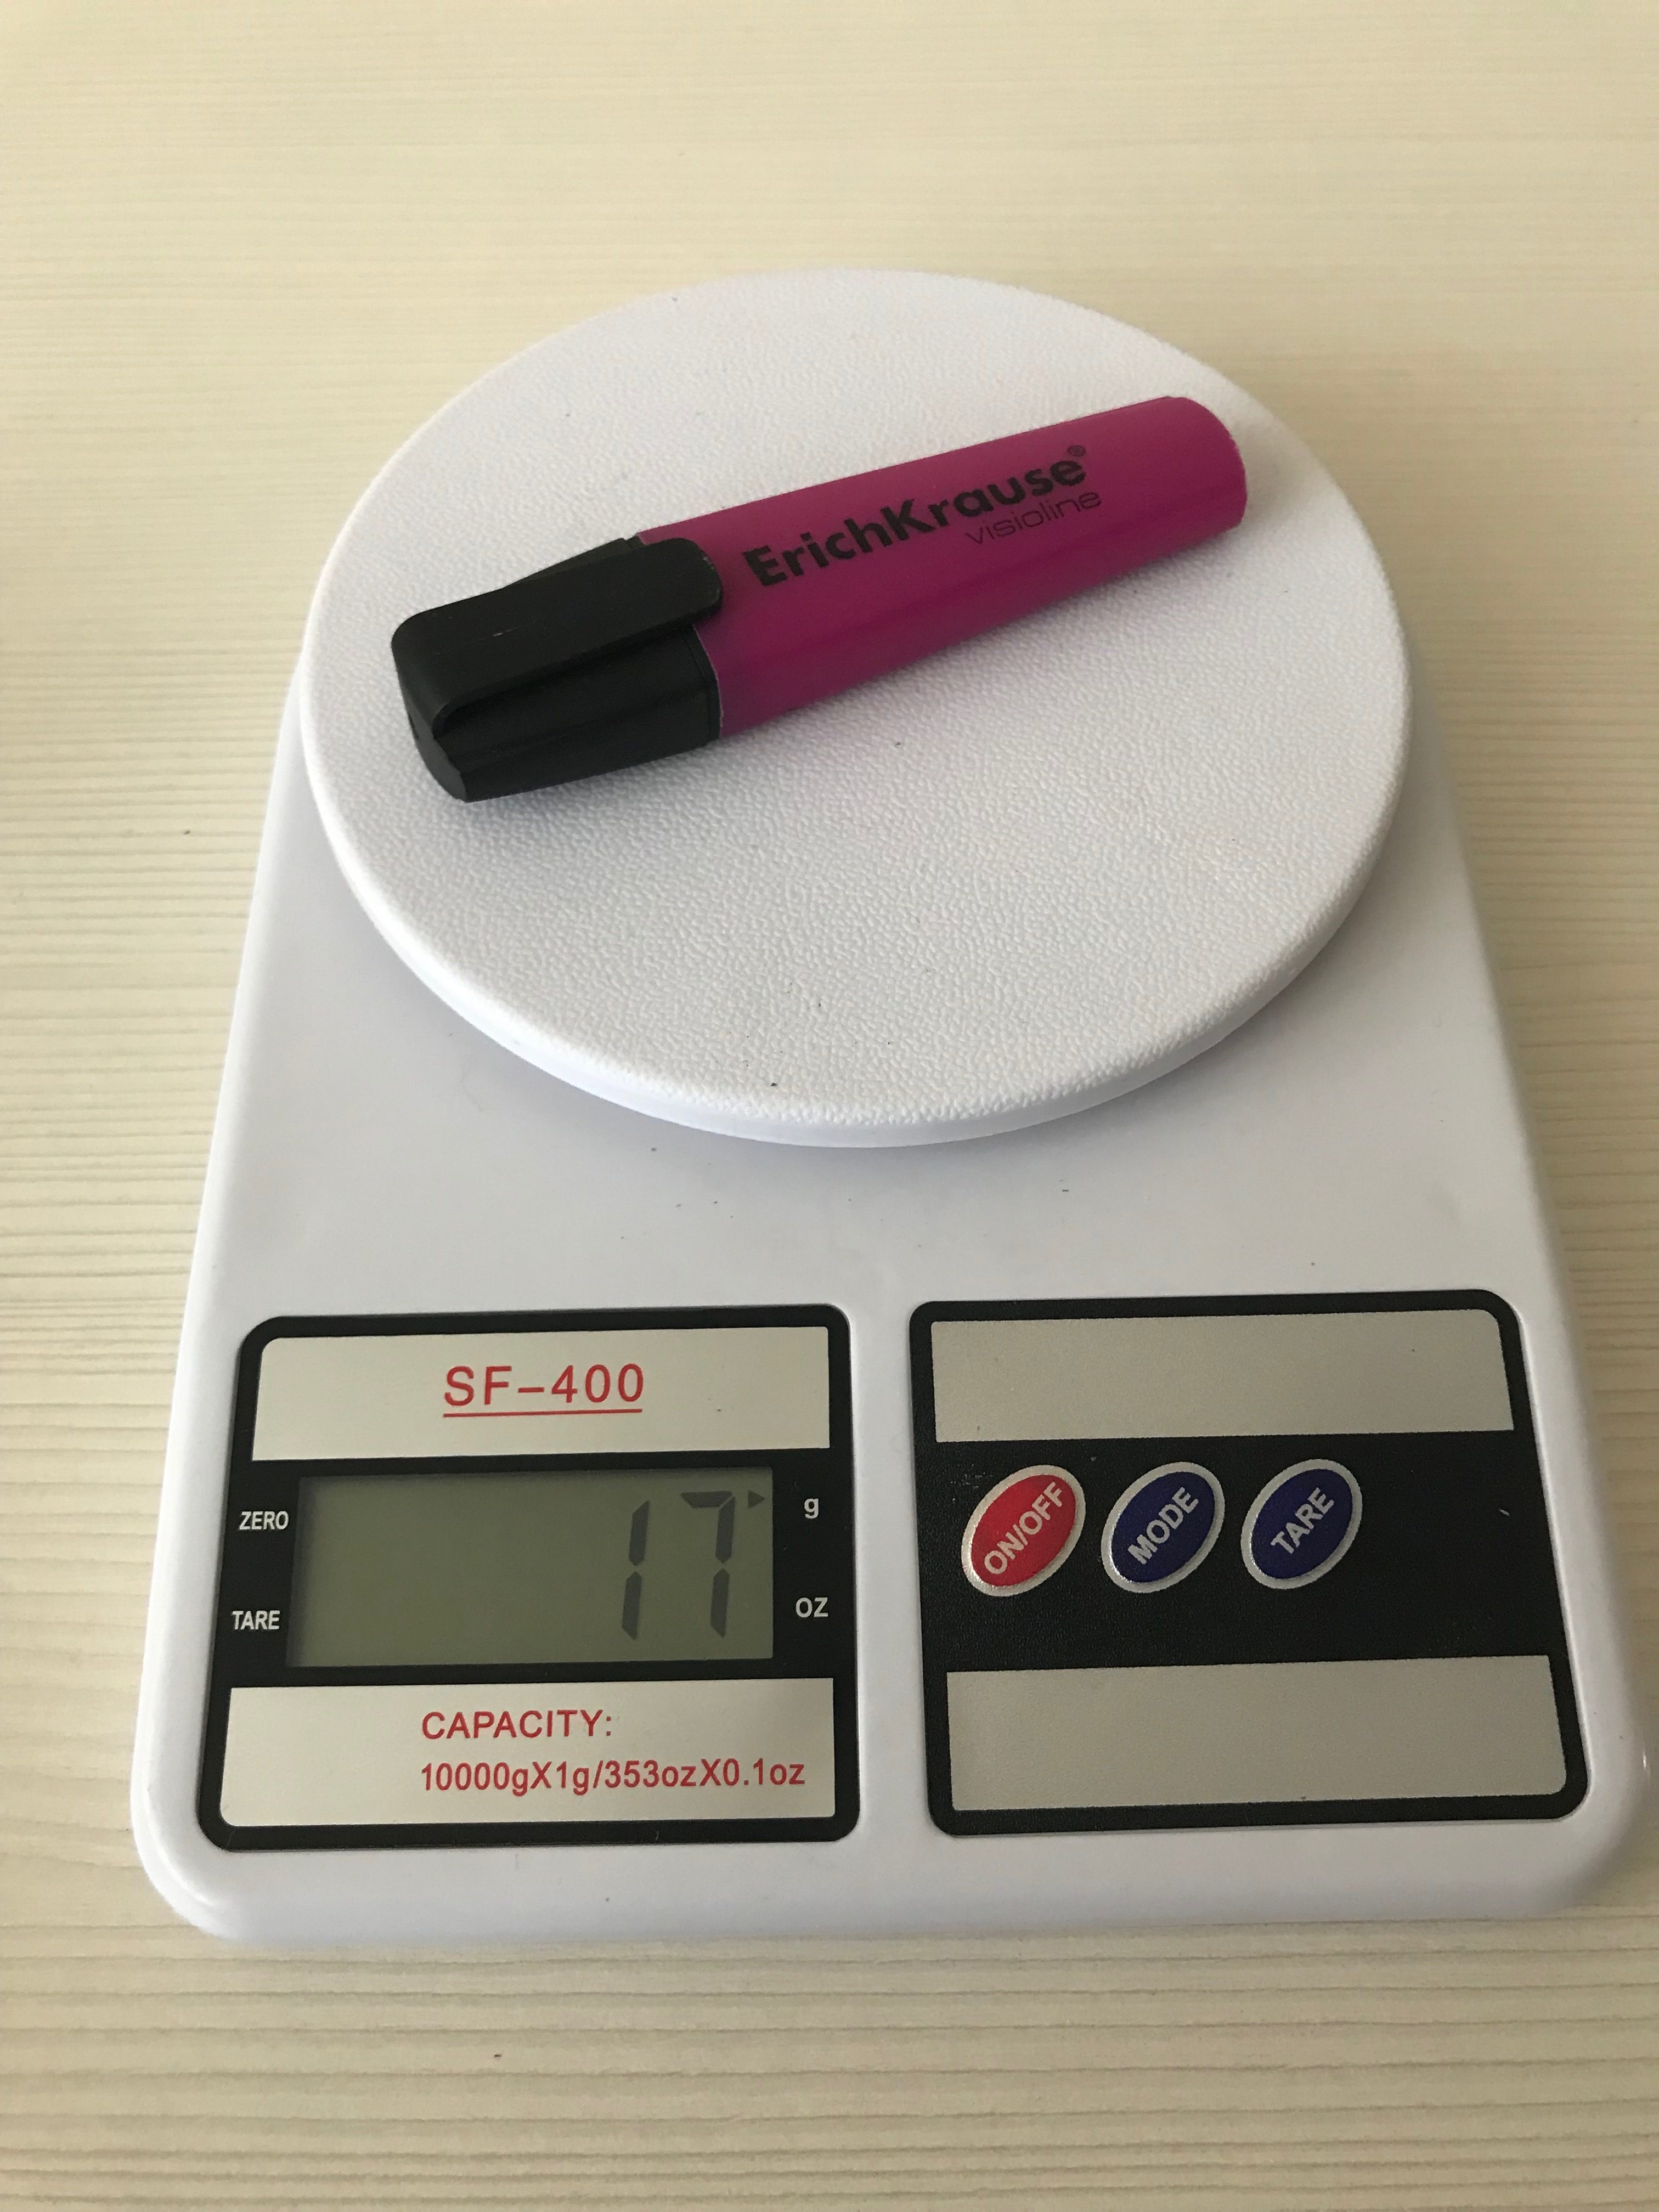 How much does a highlighter weigh?